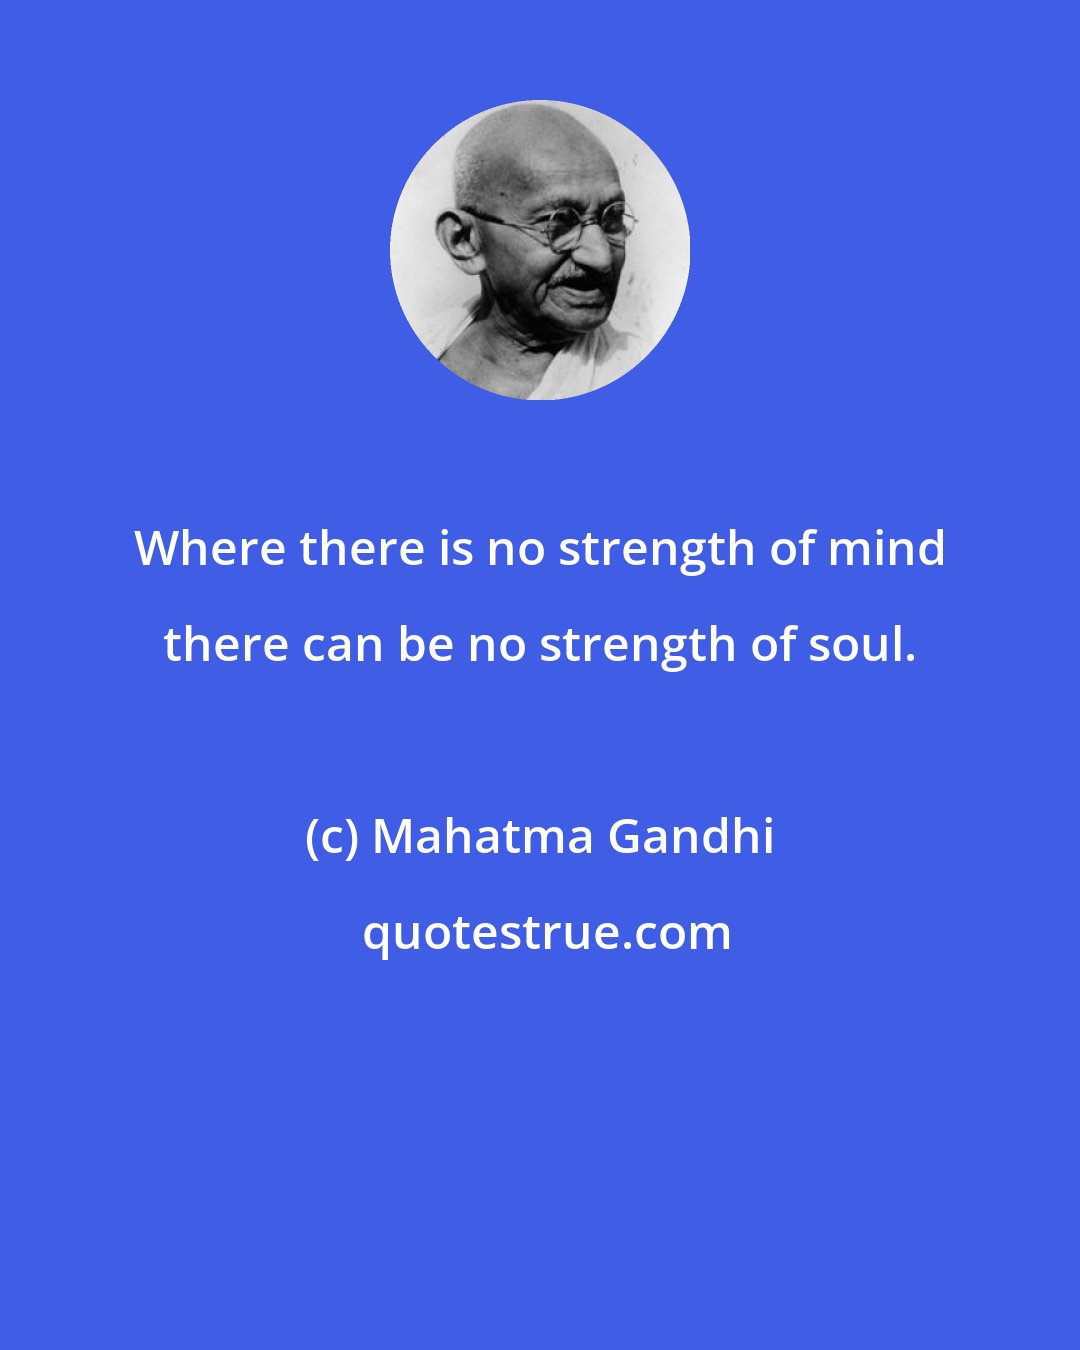 Mahatma Gandhi: Where there is no strength of mind there can be no strength of soul.